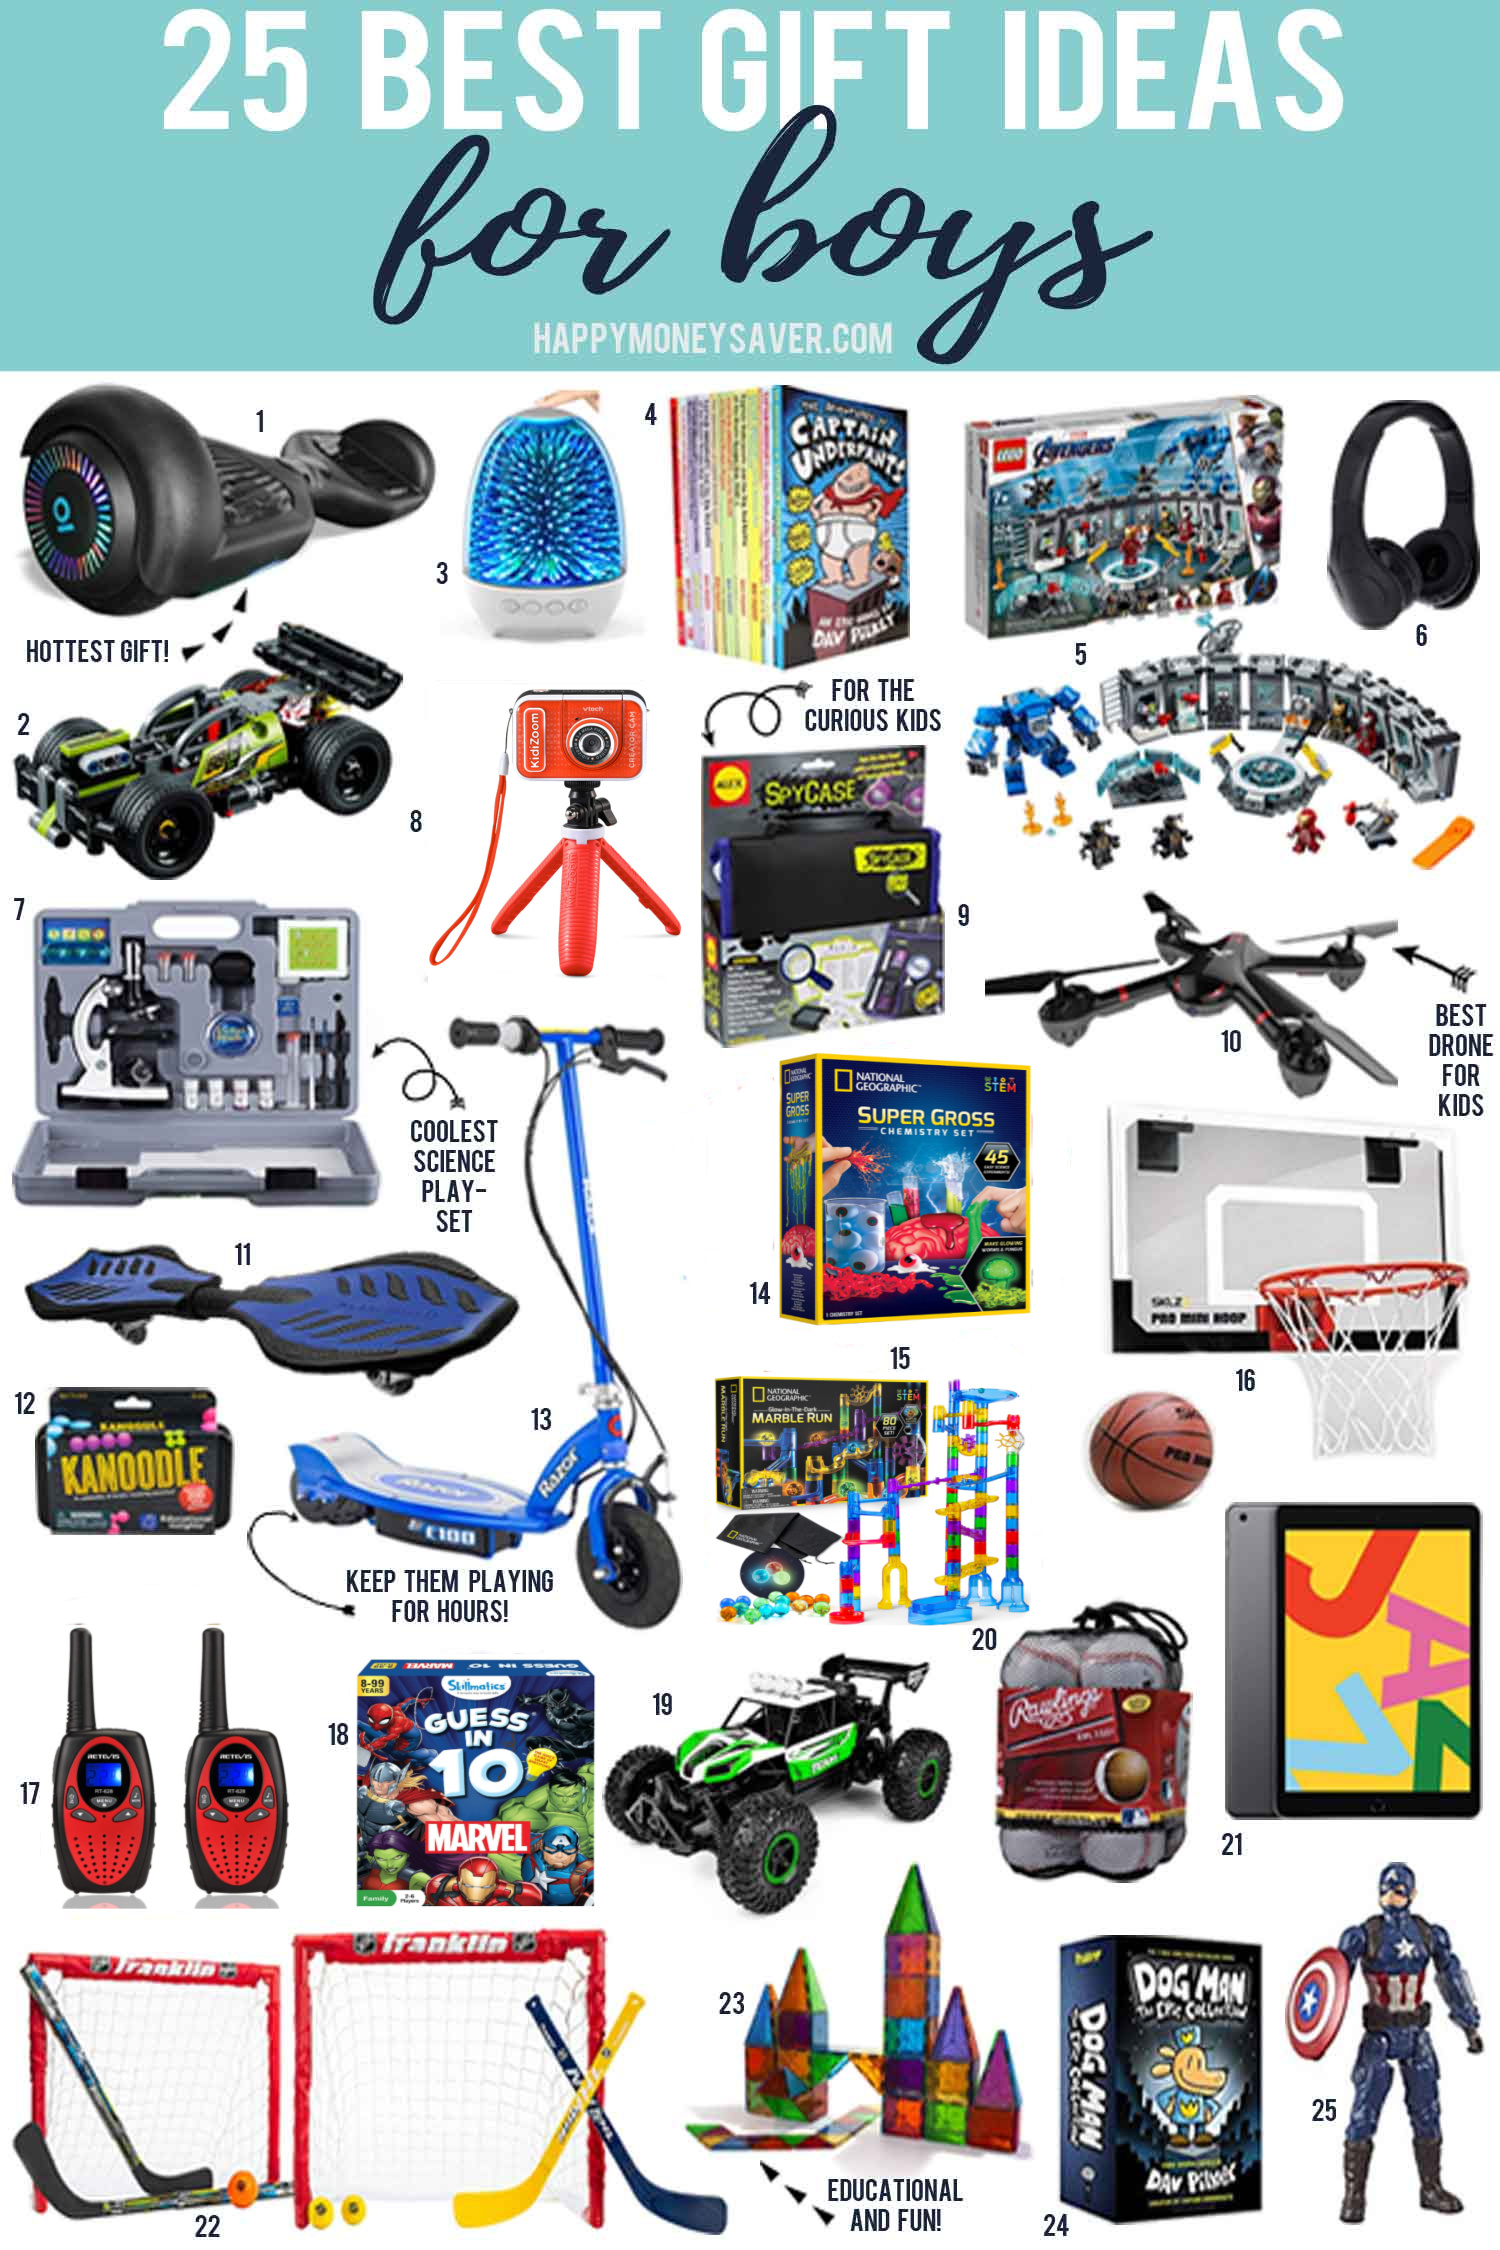 The 25 Best gifts for boys in 2022 with images of all the toys and games